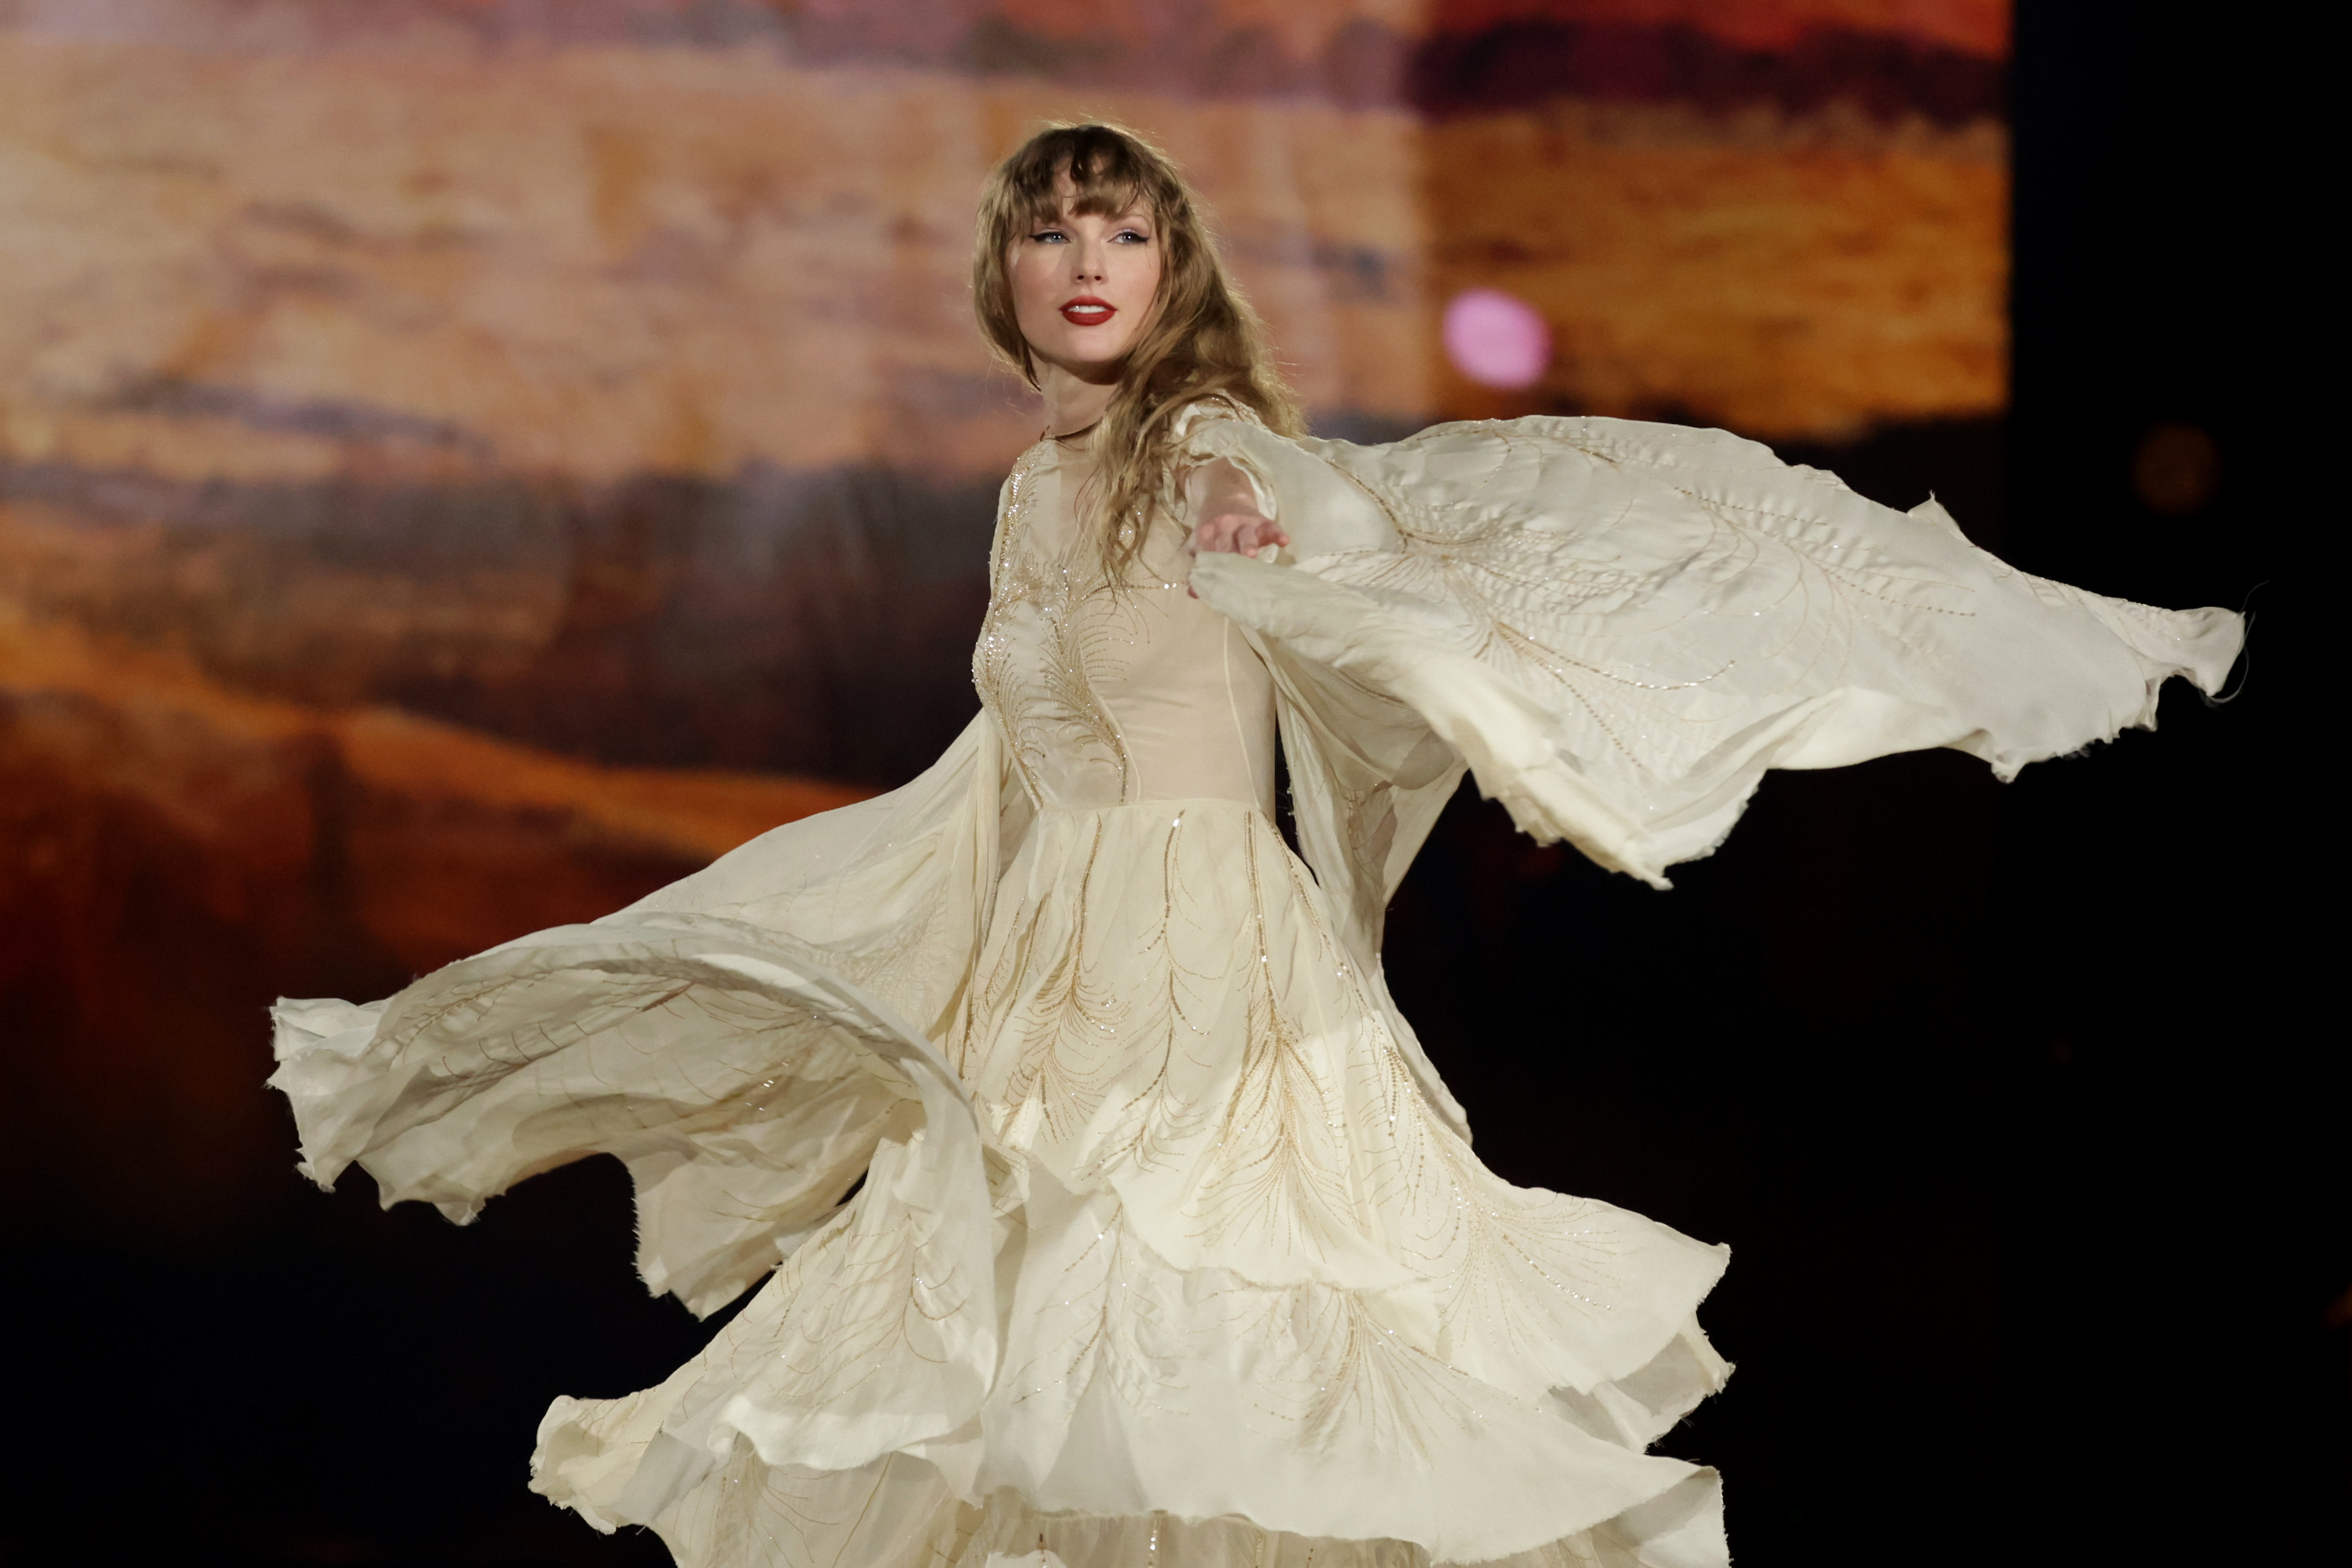 Taylor Swift's Apple Music clues for ‘The Tortured Poets
Department,' explained